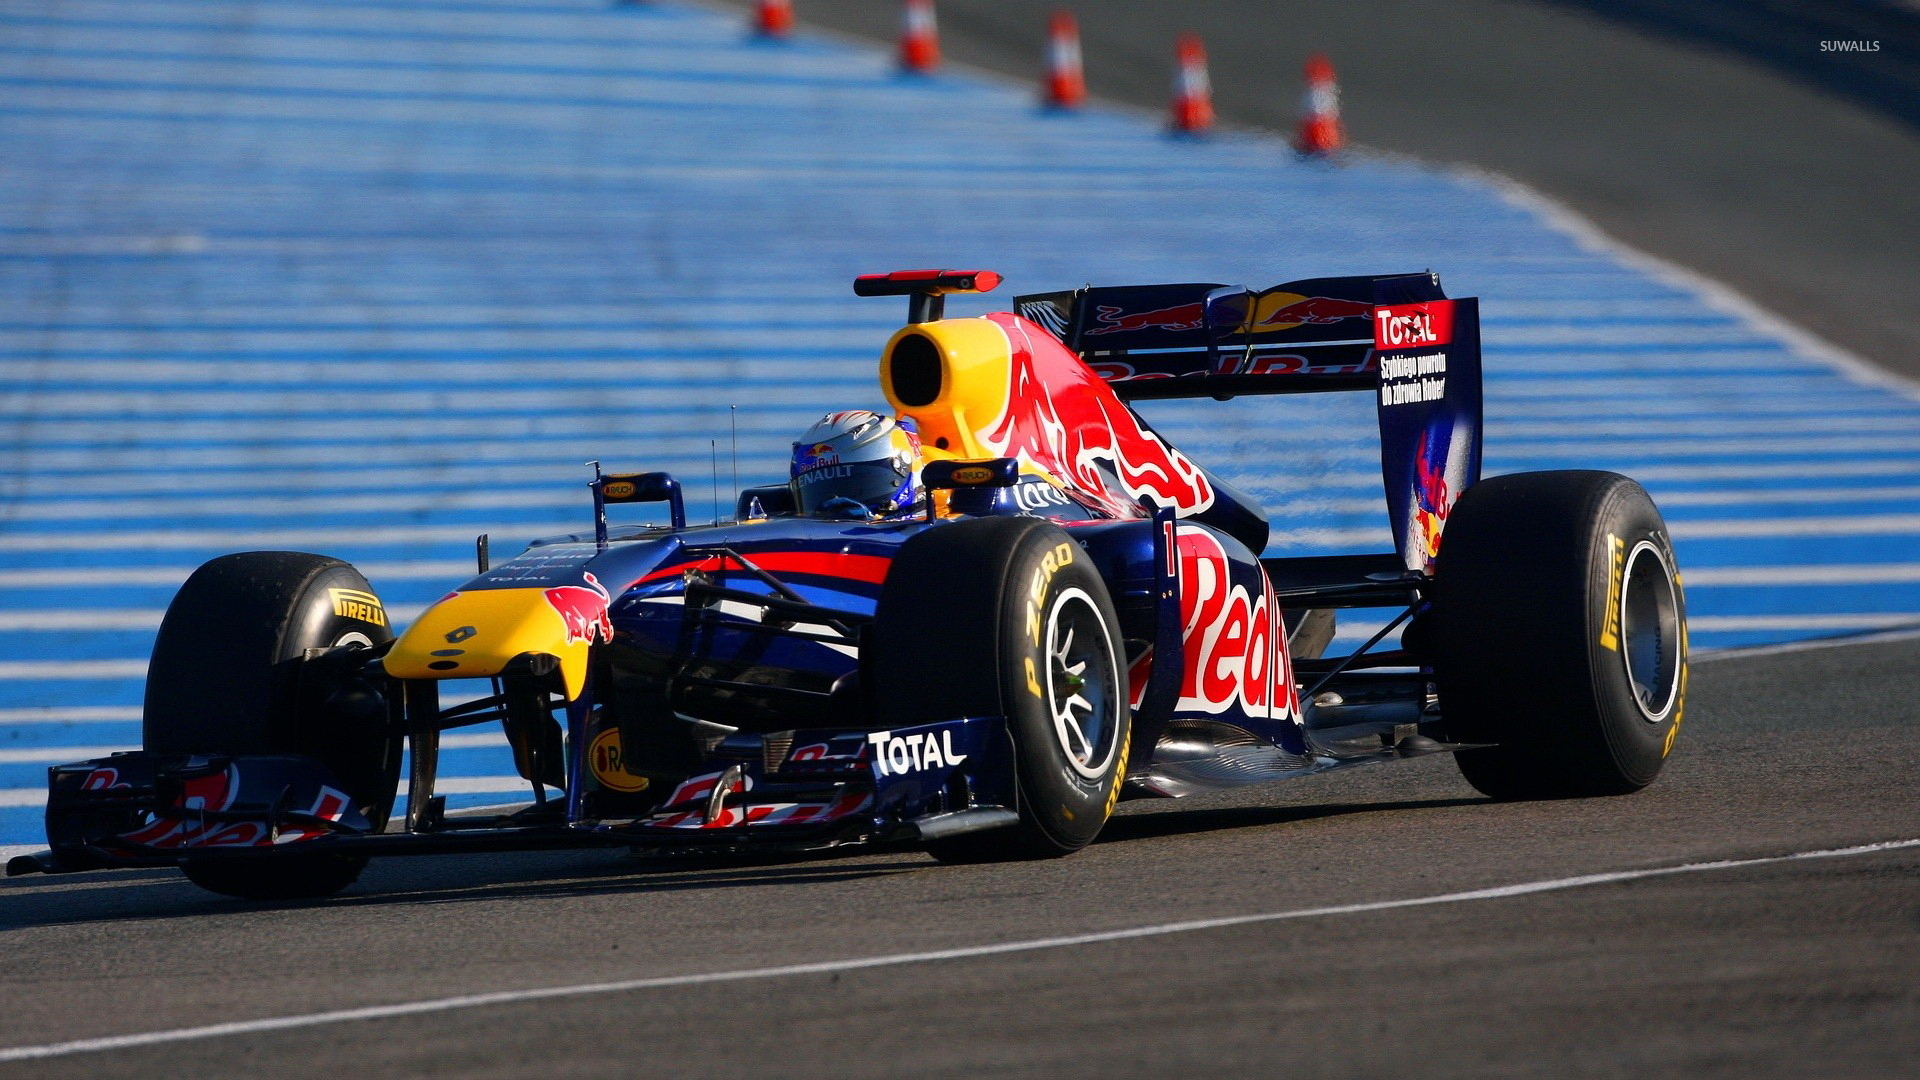 Red Bull Racing Rb4 Wallpapers